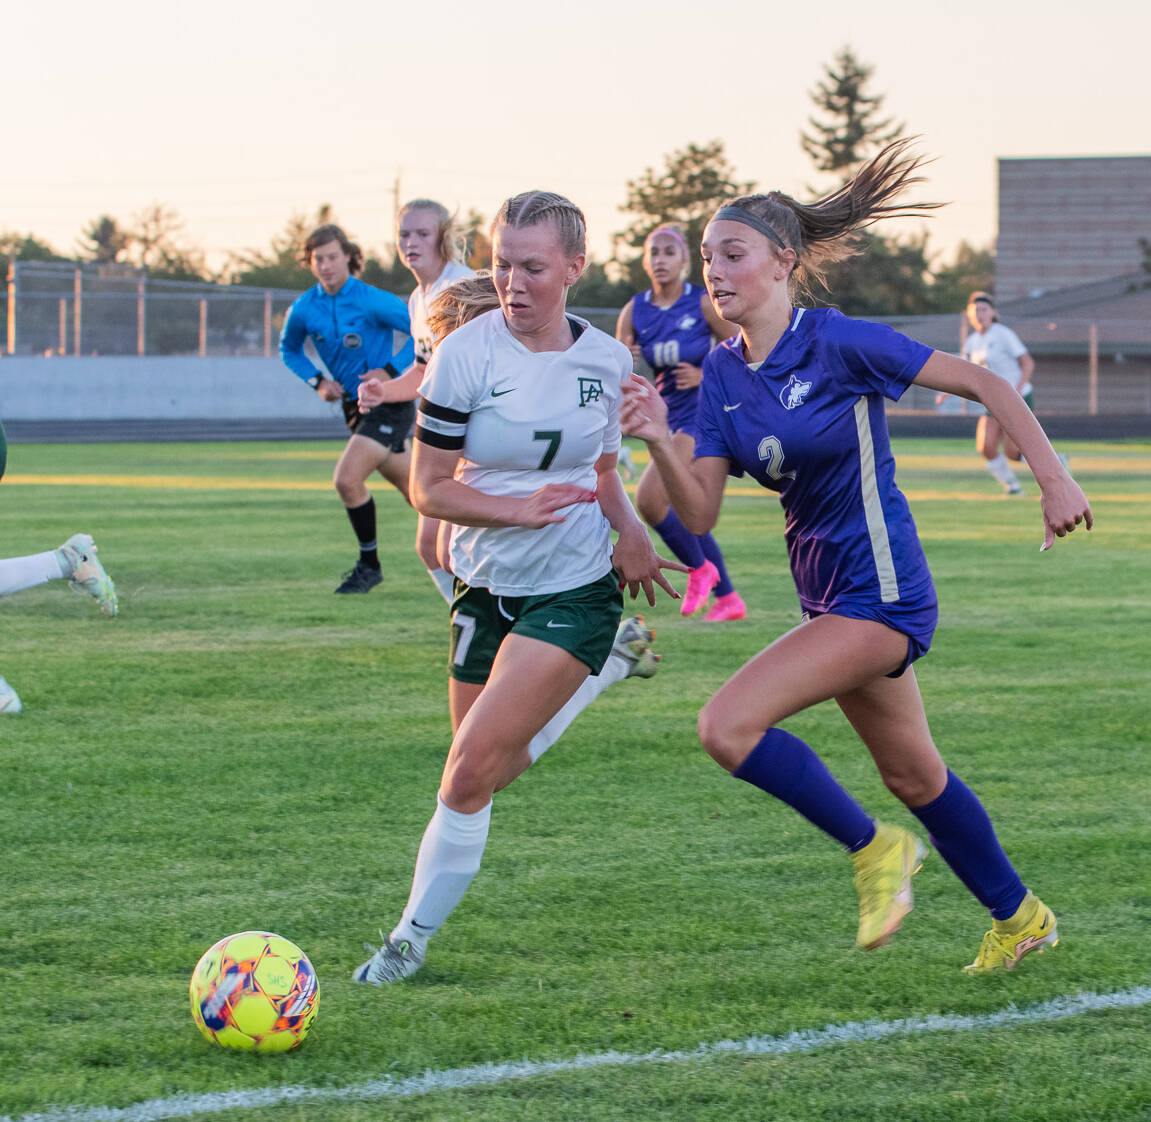 Sequim Gazette photo by Emily Matthiessen / Port Angeles’ Izzy Felton, left, and Sequim’s Mikiah Winter vie for the ball in a Sept. 15 Olympic League game in Sequim. The Wolves defended their home turf with a 2-1 victory.